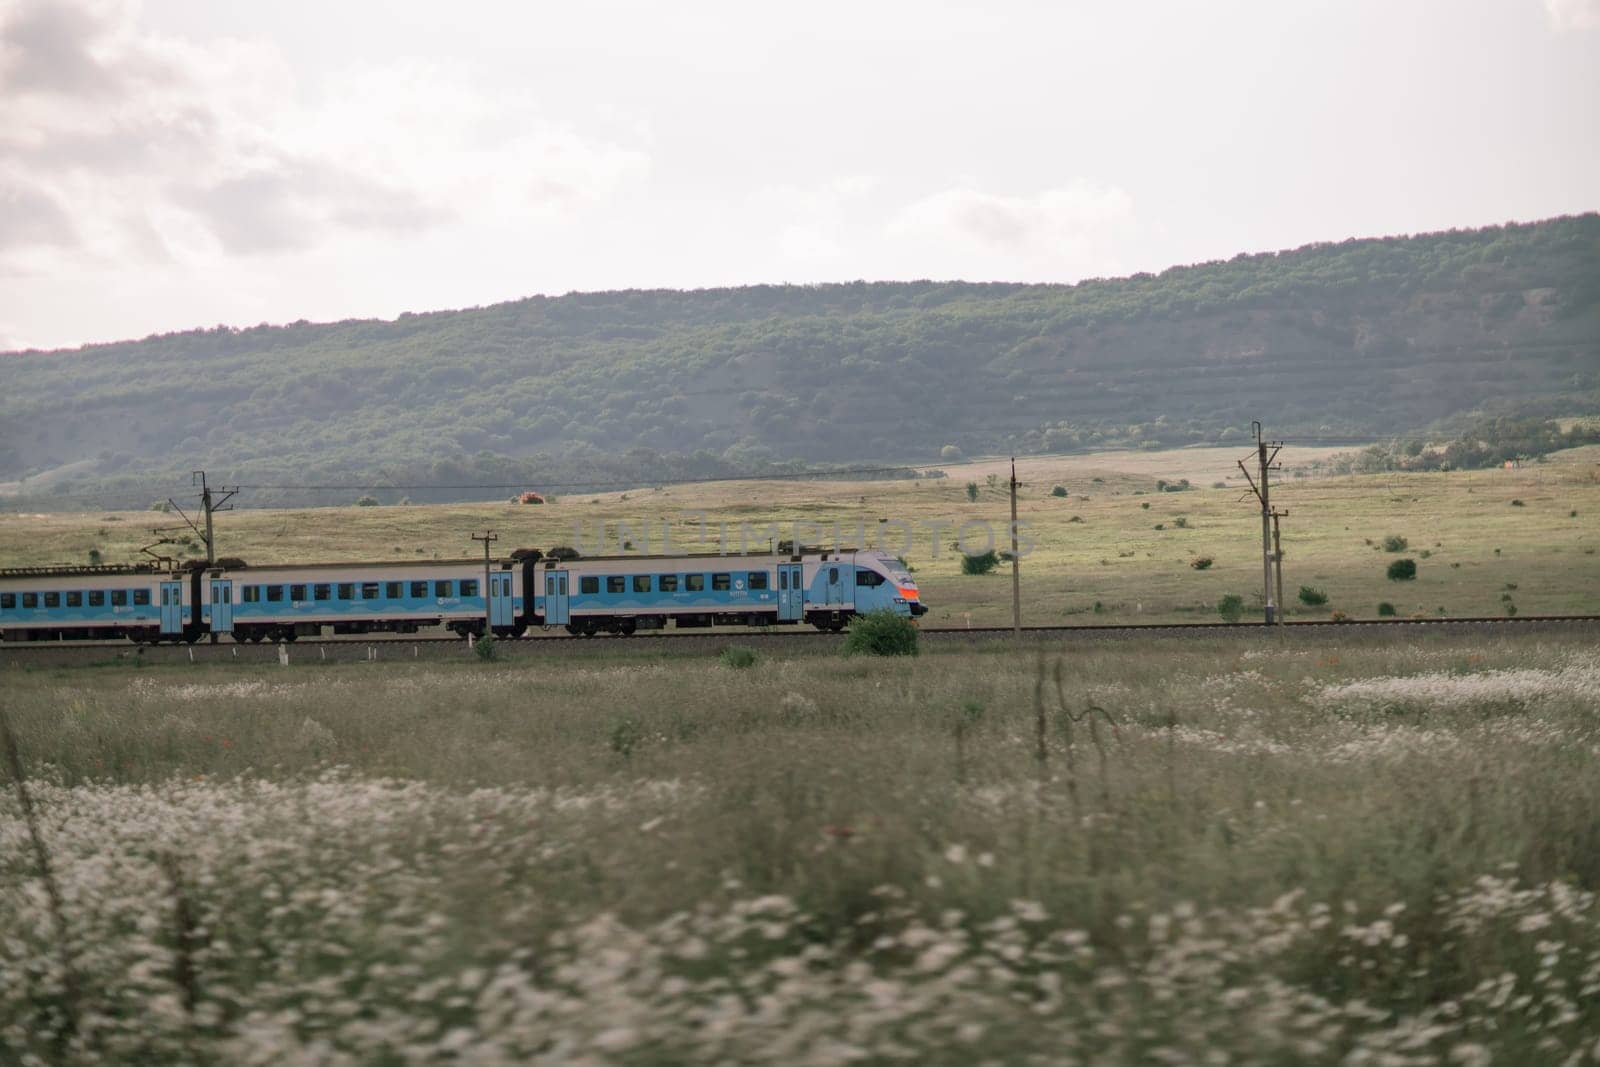 A train is traveling through a field of grass. The train is blue and has a red stripe